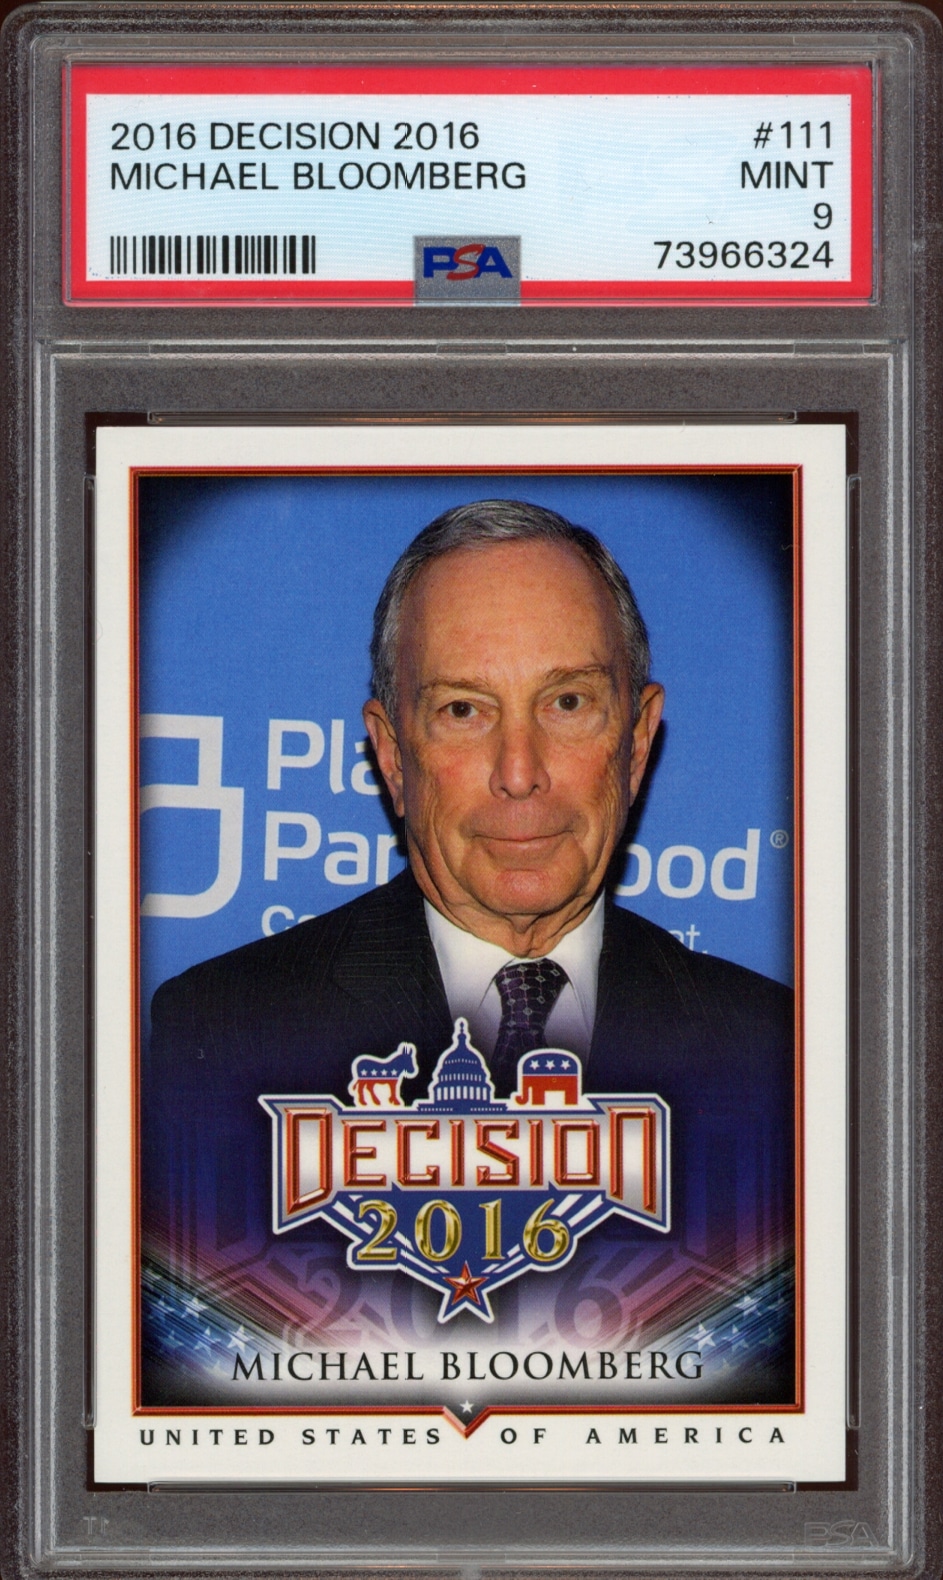 Graded Mint 9 Michael Bloomberg 2016 Decision Trading Card by PSA.